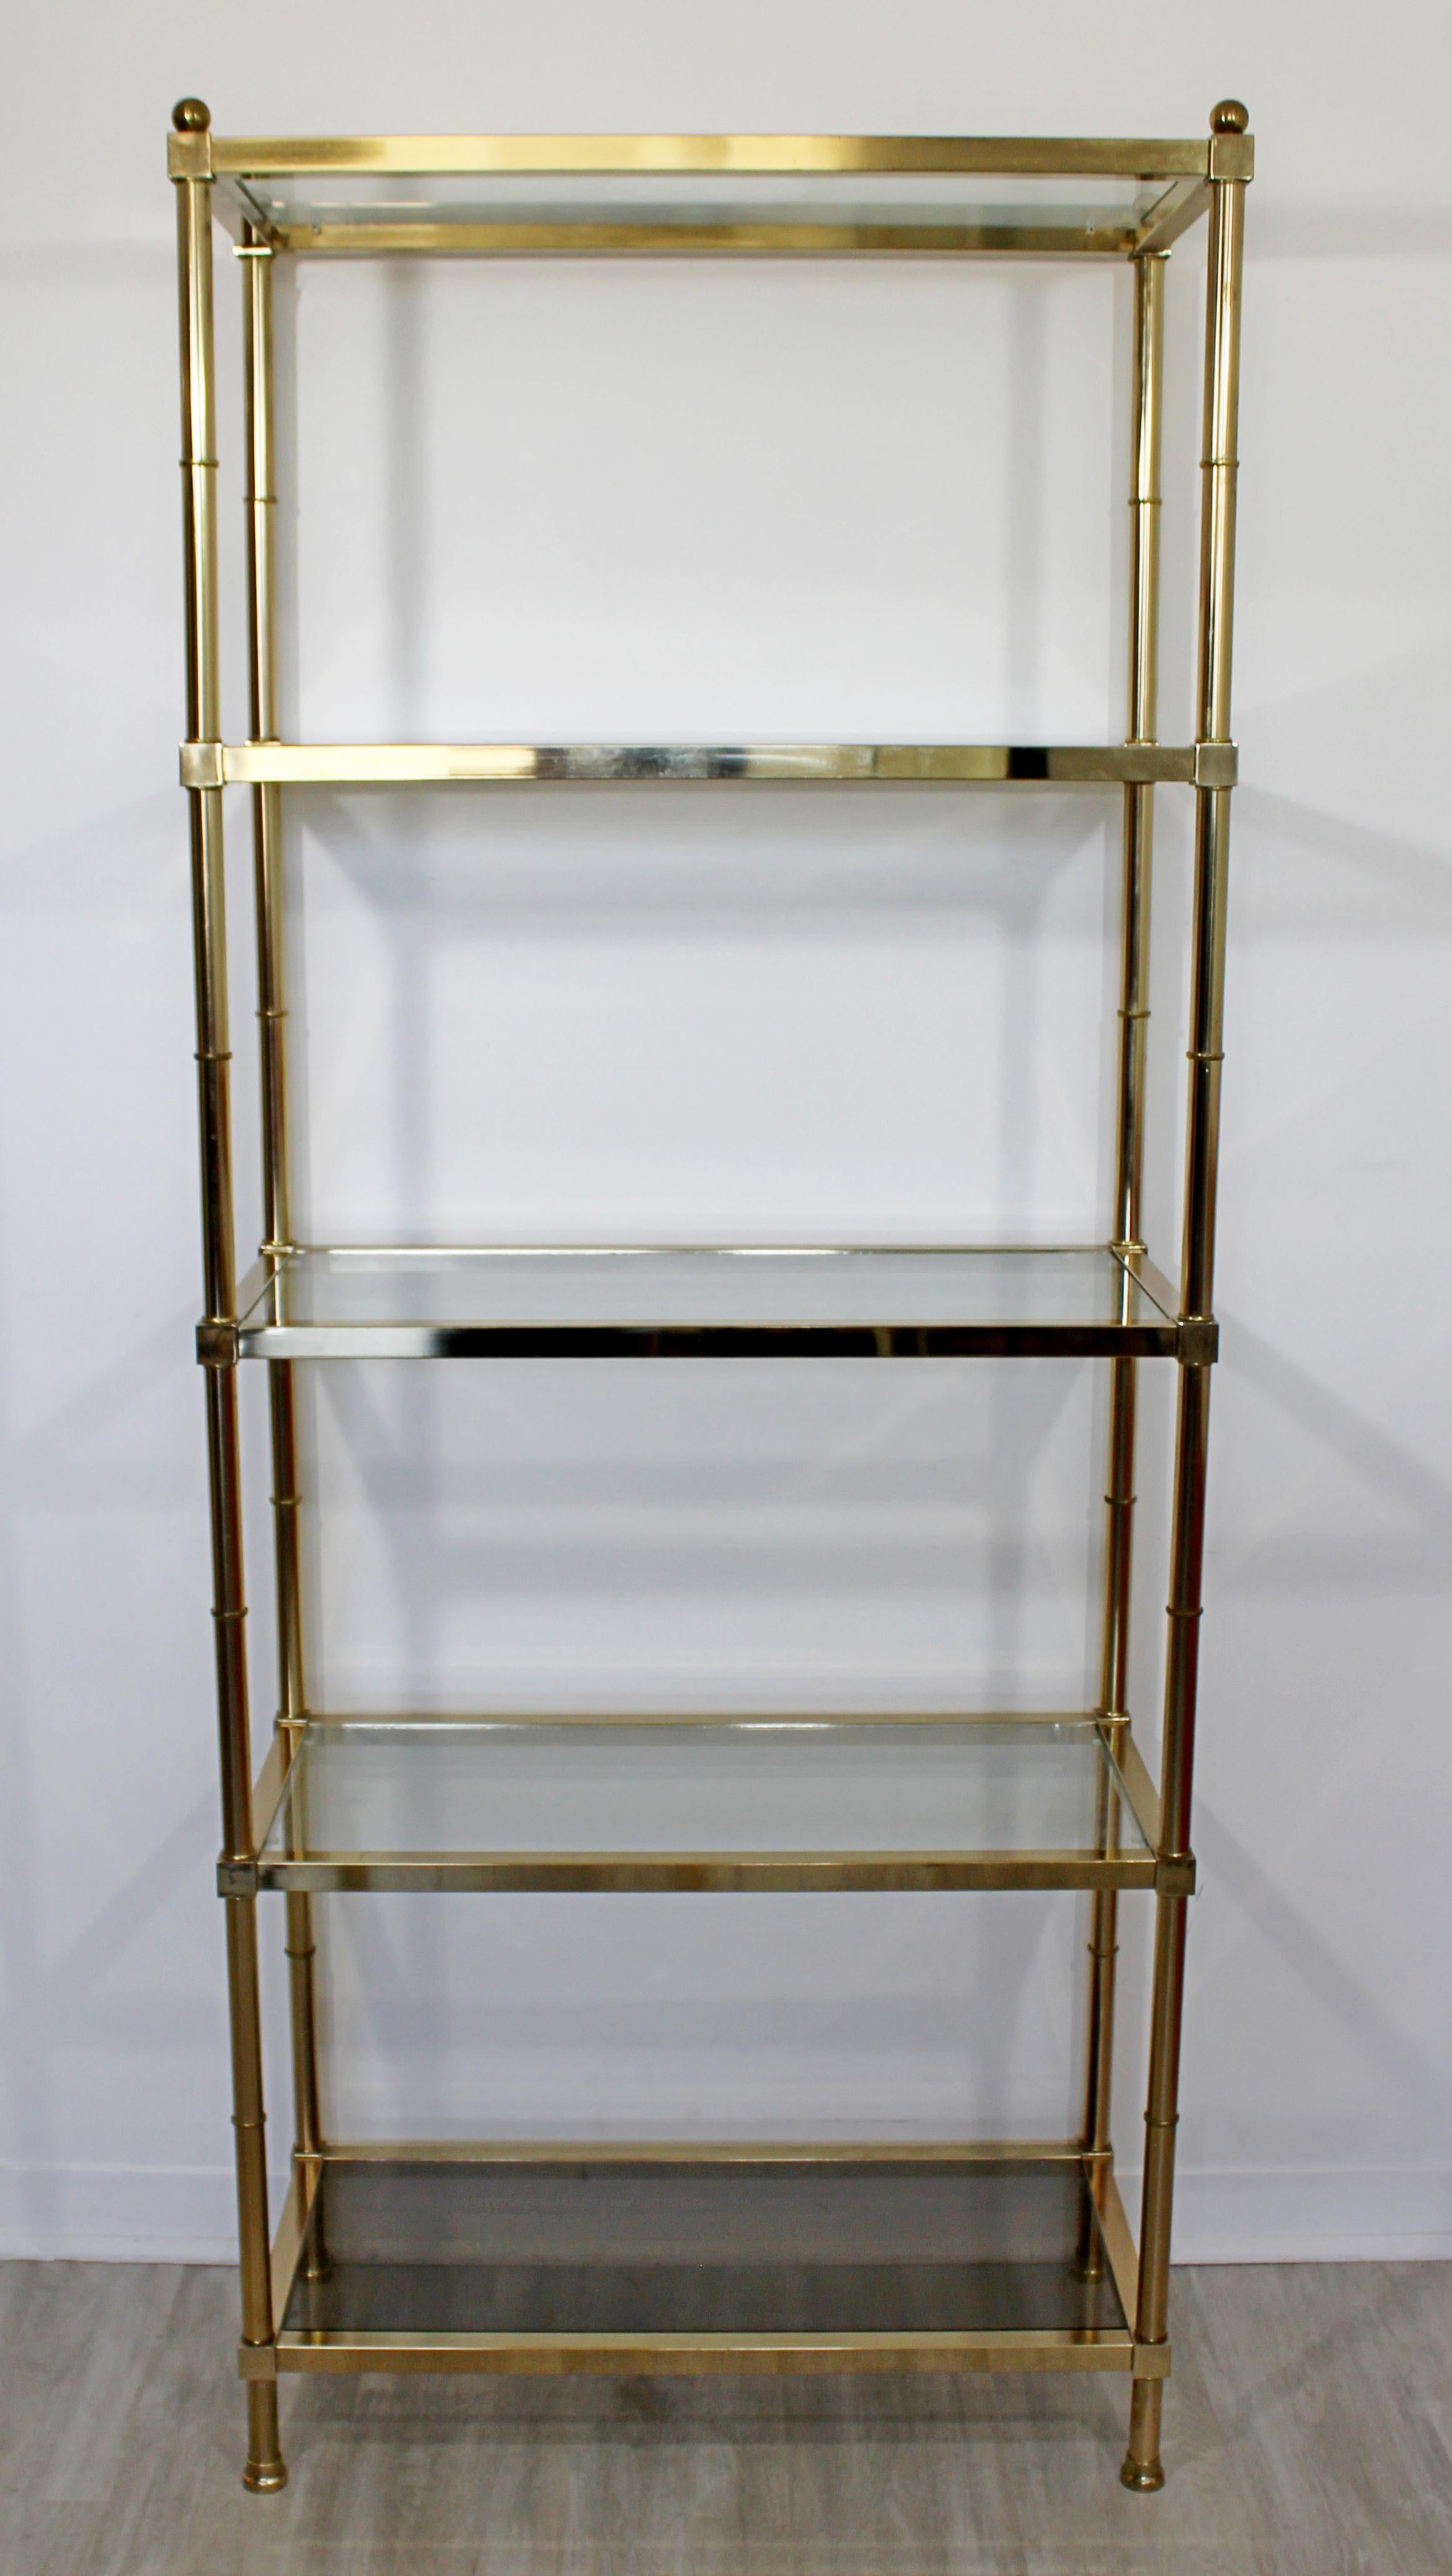 For your consideration is a stunning, brass and glass shelving unit étagère, with five shelves and the bottom shelf is smoked, by Maison Jansen, circa 1960s. In excellent vintage condition. The dimensions are 30.5